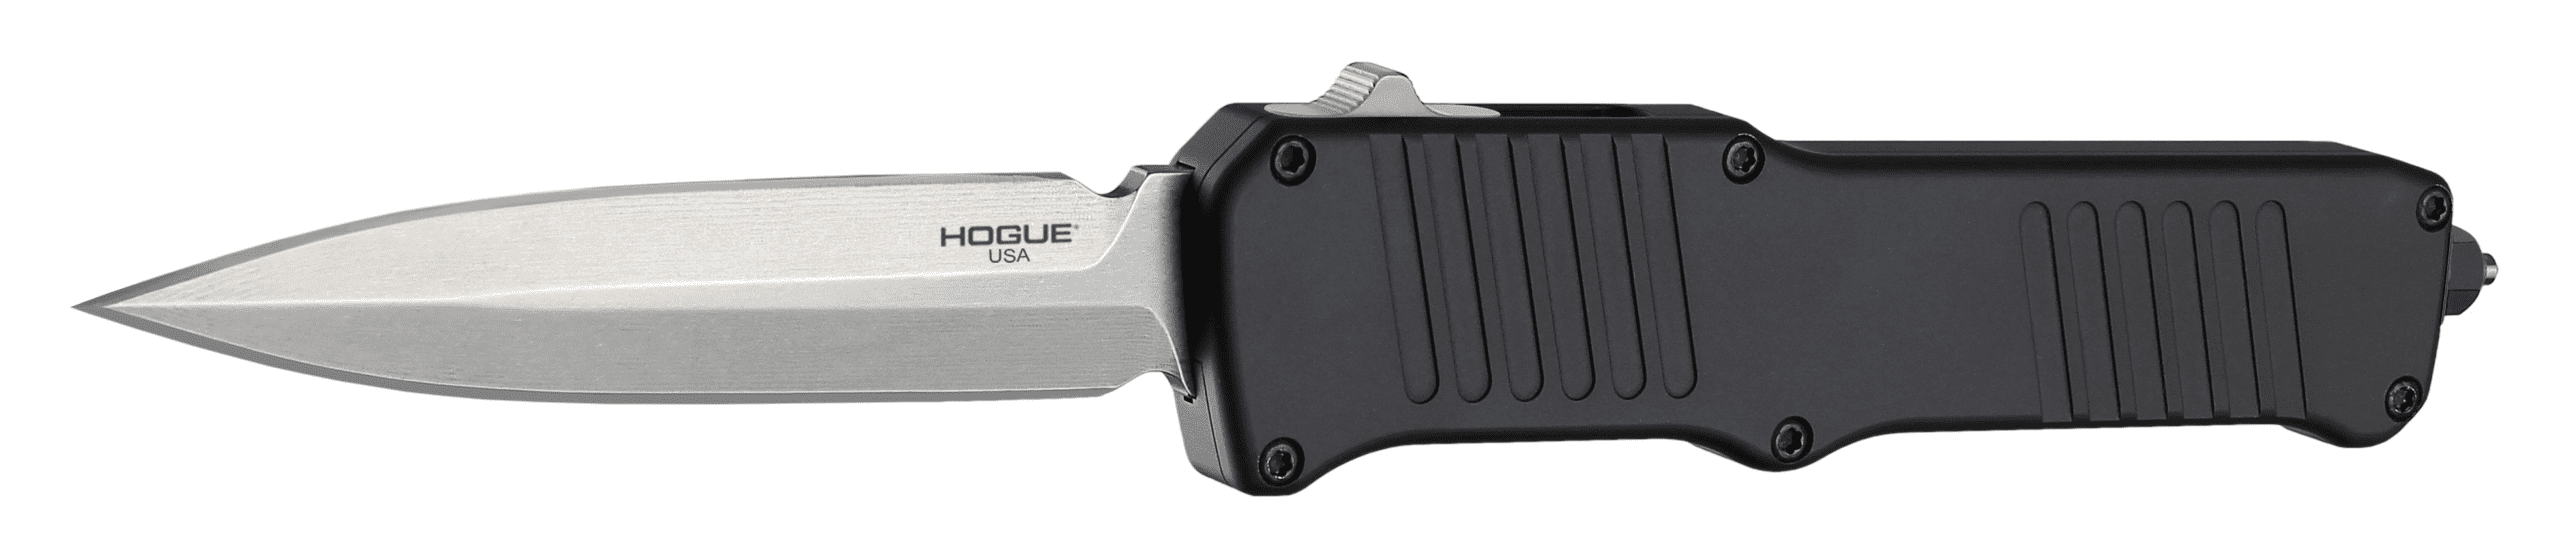 Hogue Incursion Double-Action OTF Automatic Knife